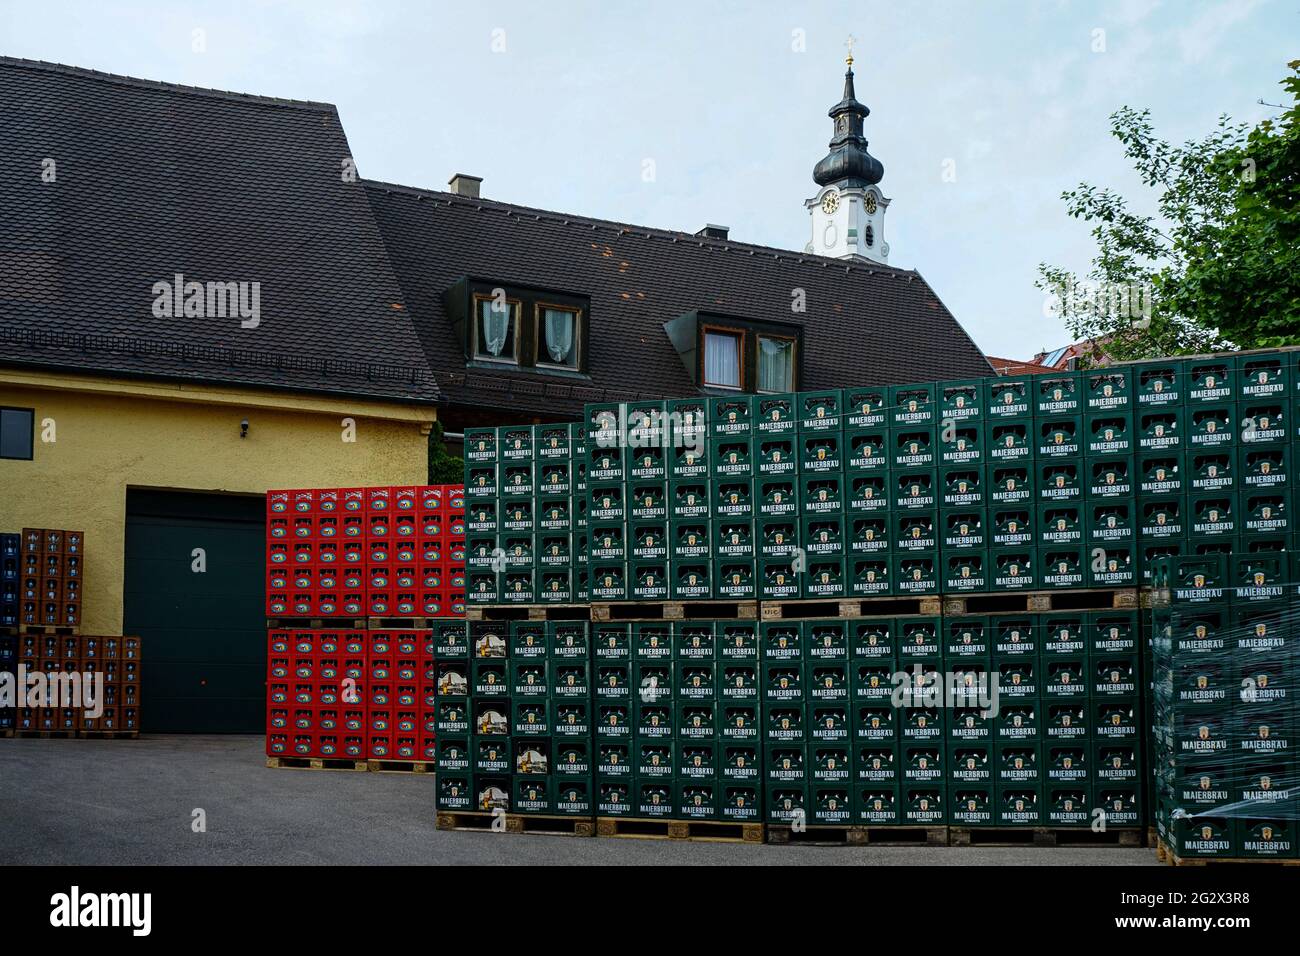 Beverage crates in the yard of a Bavarian beer brewery In Altomünster, district of Dachau nit view of a tower of a Catholic church. Stock Photo